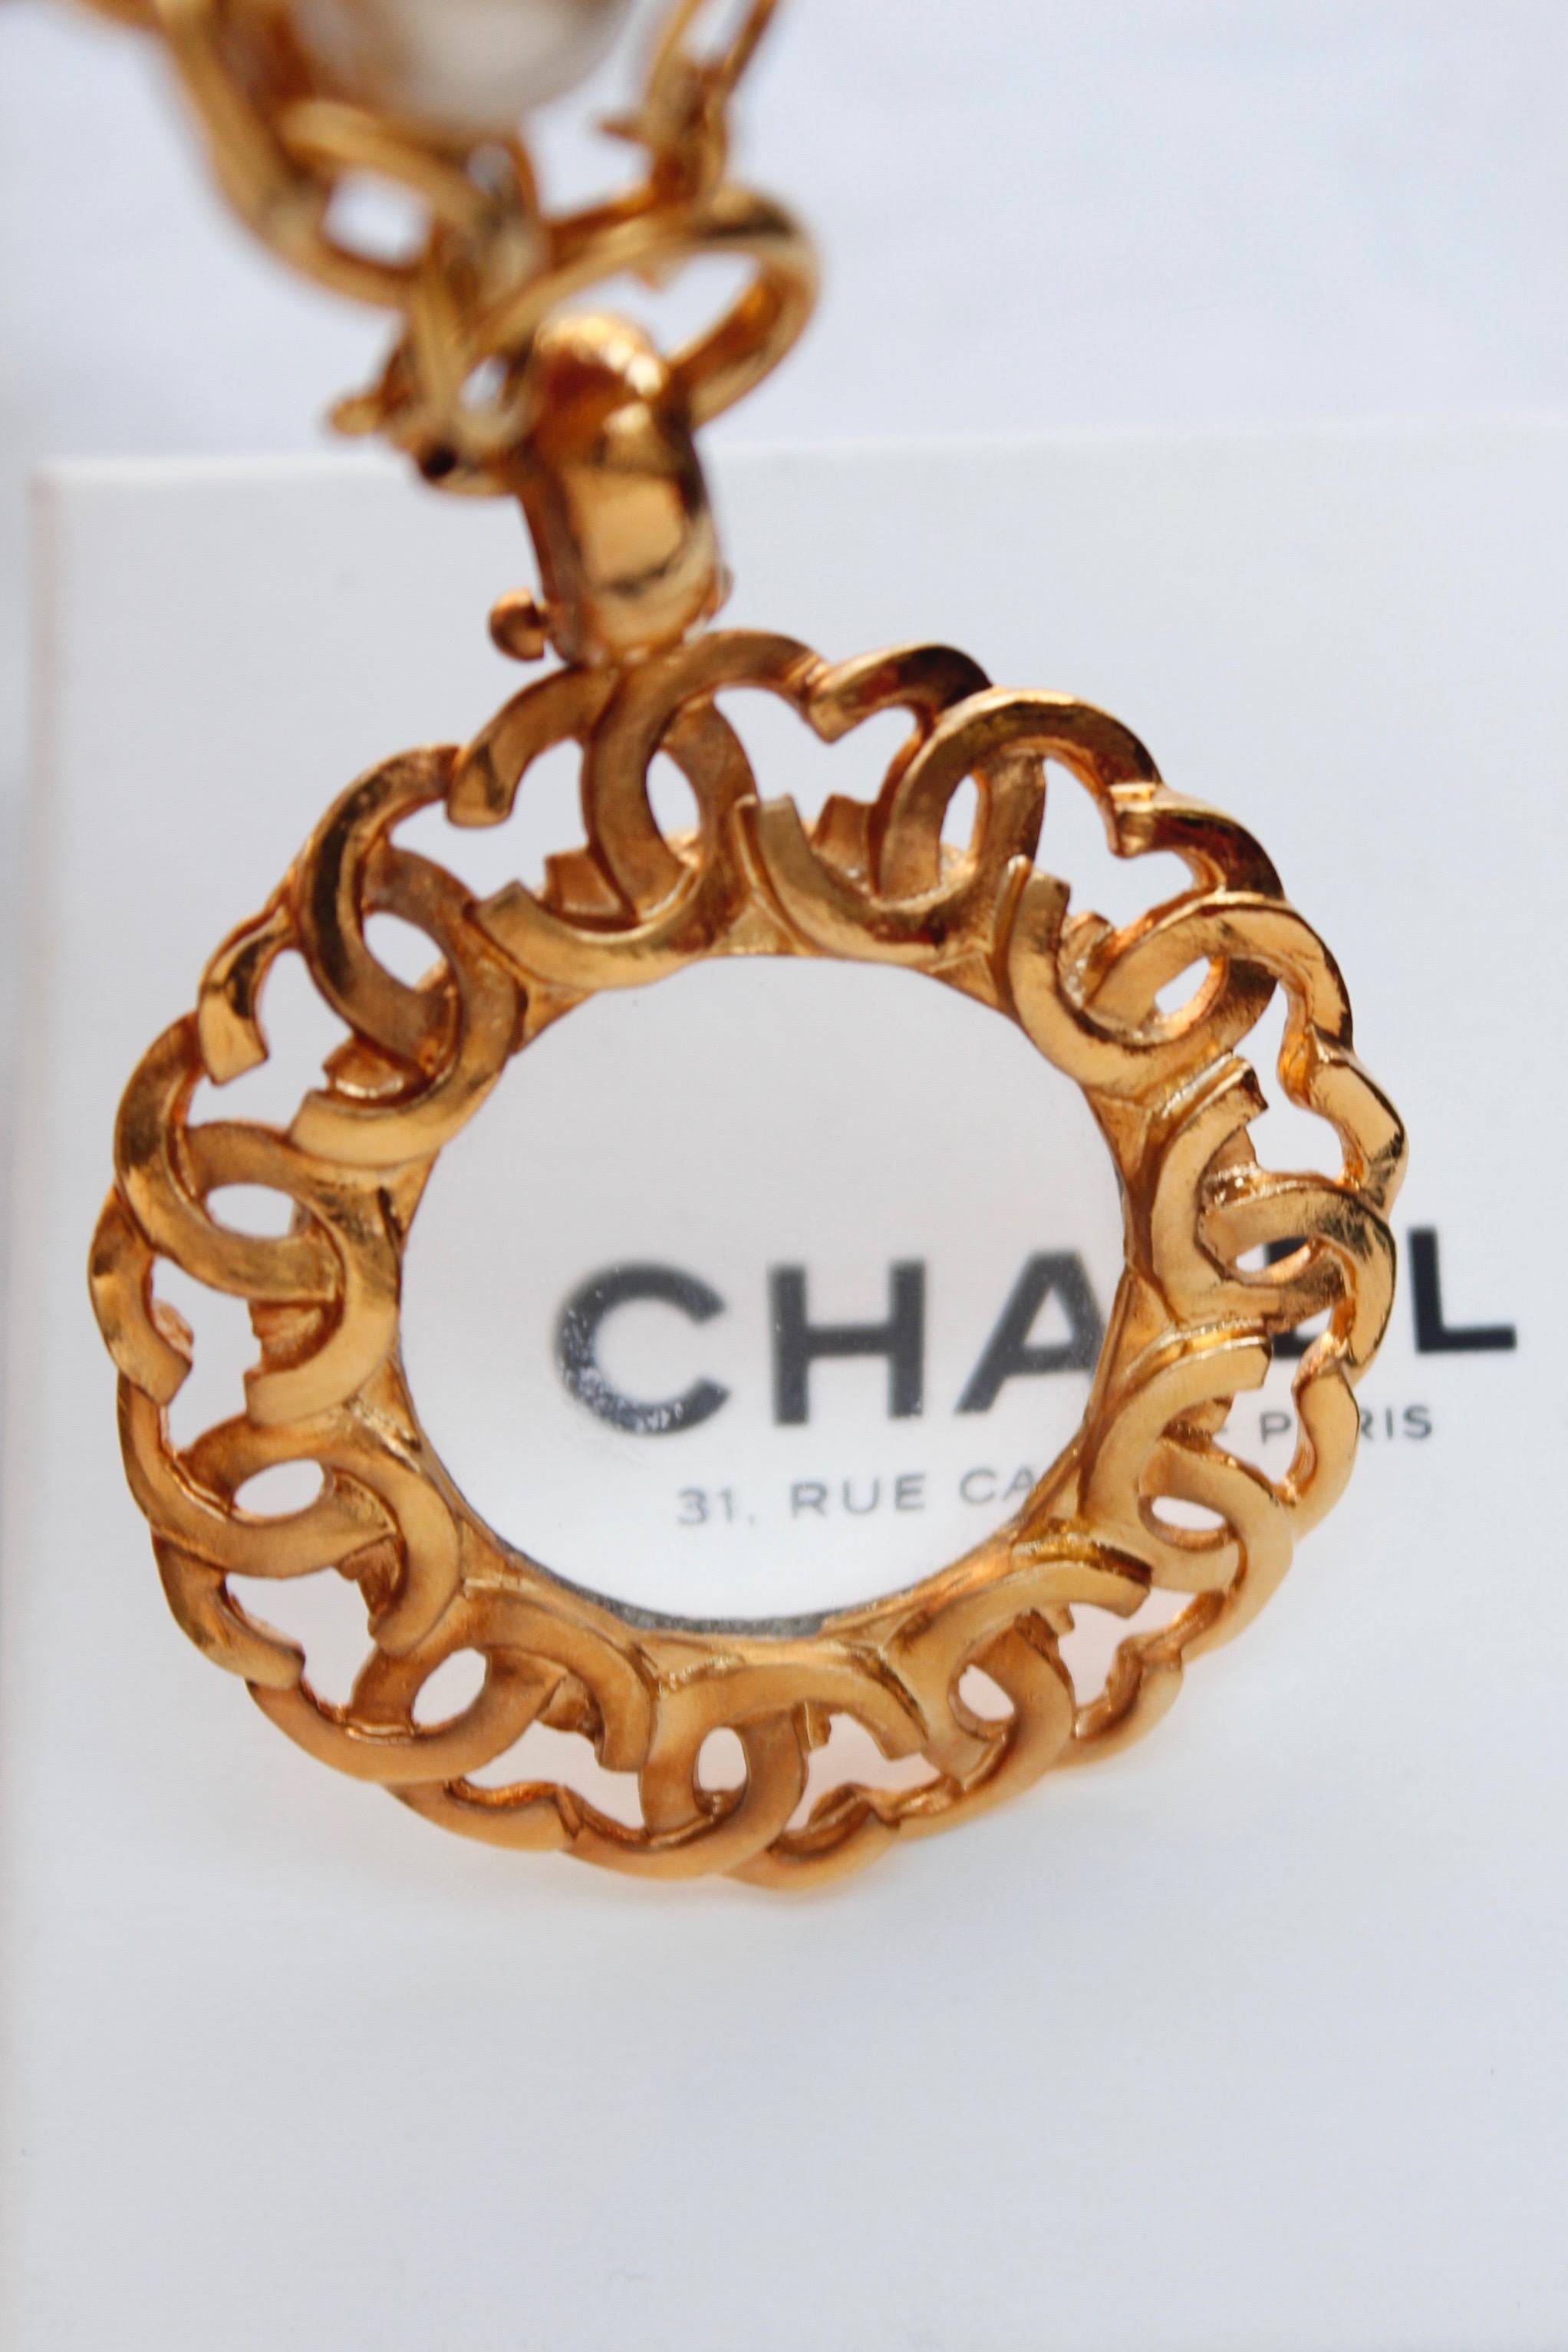 Women's 1980s Chanel magnifying glass necklace